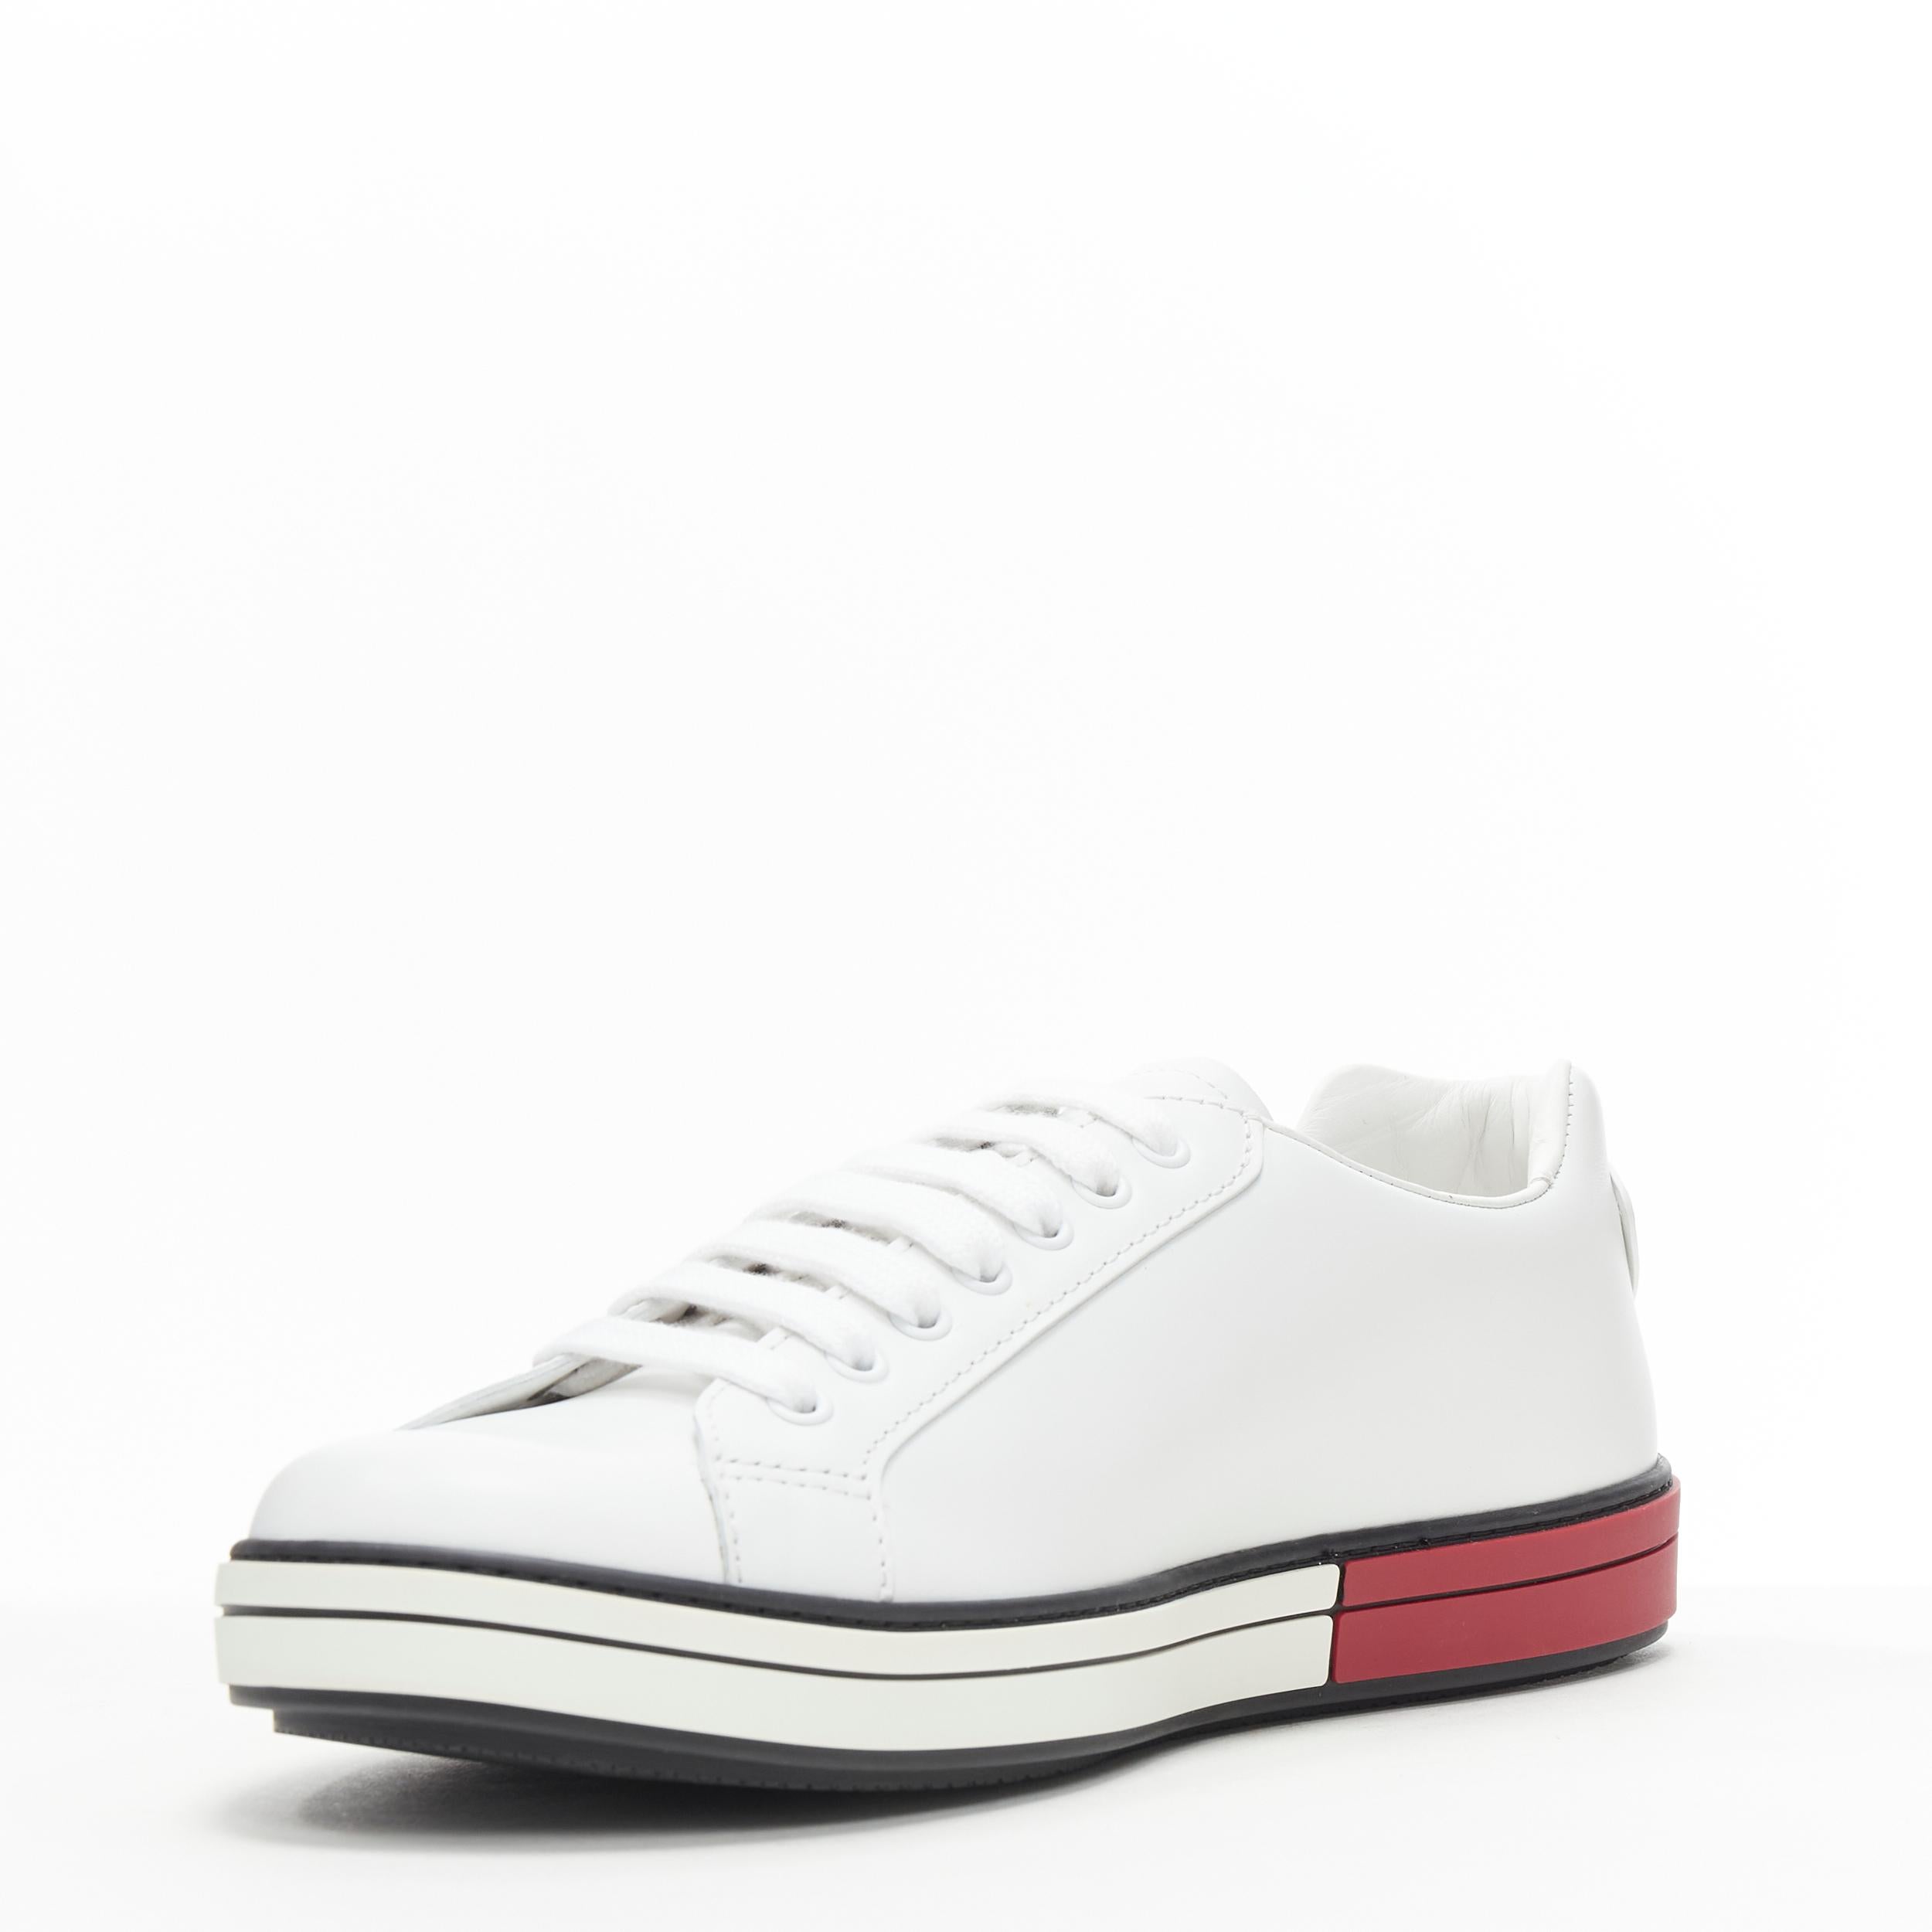 prada red and white sneakers